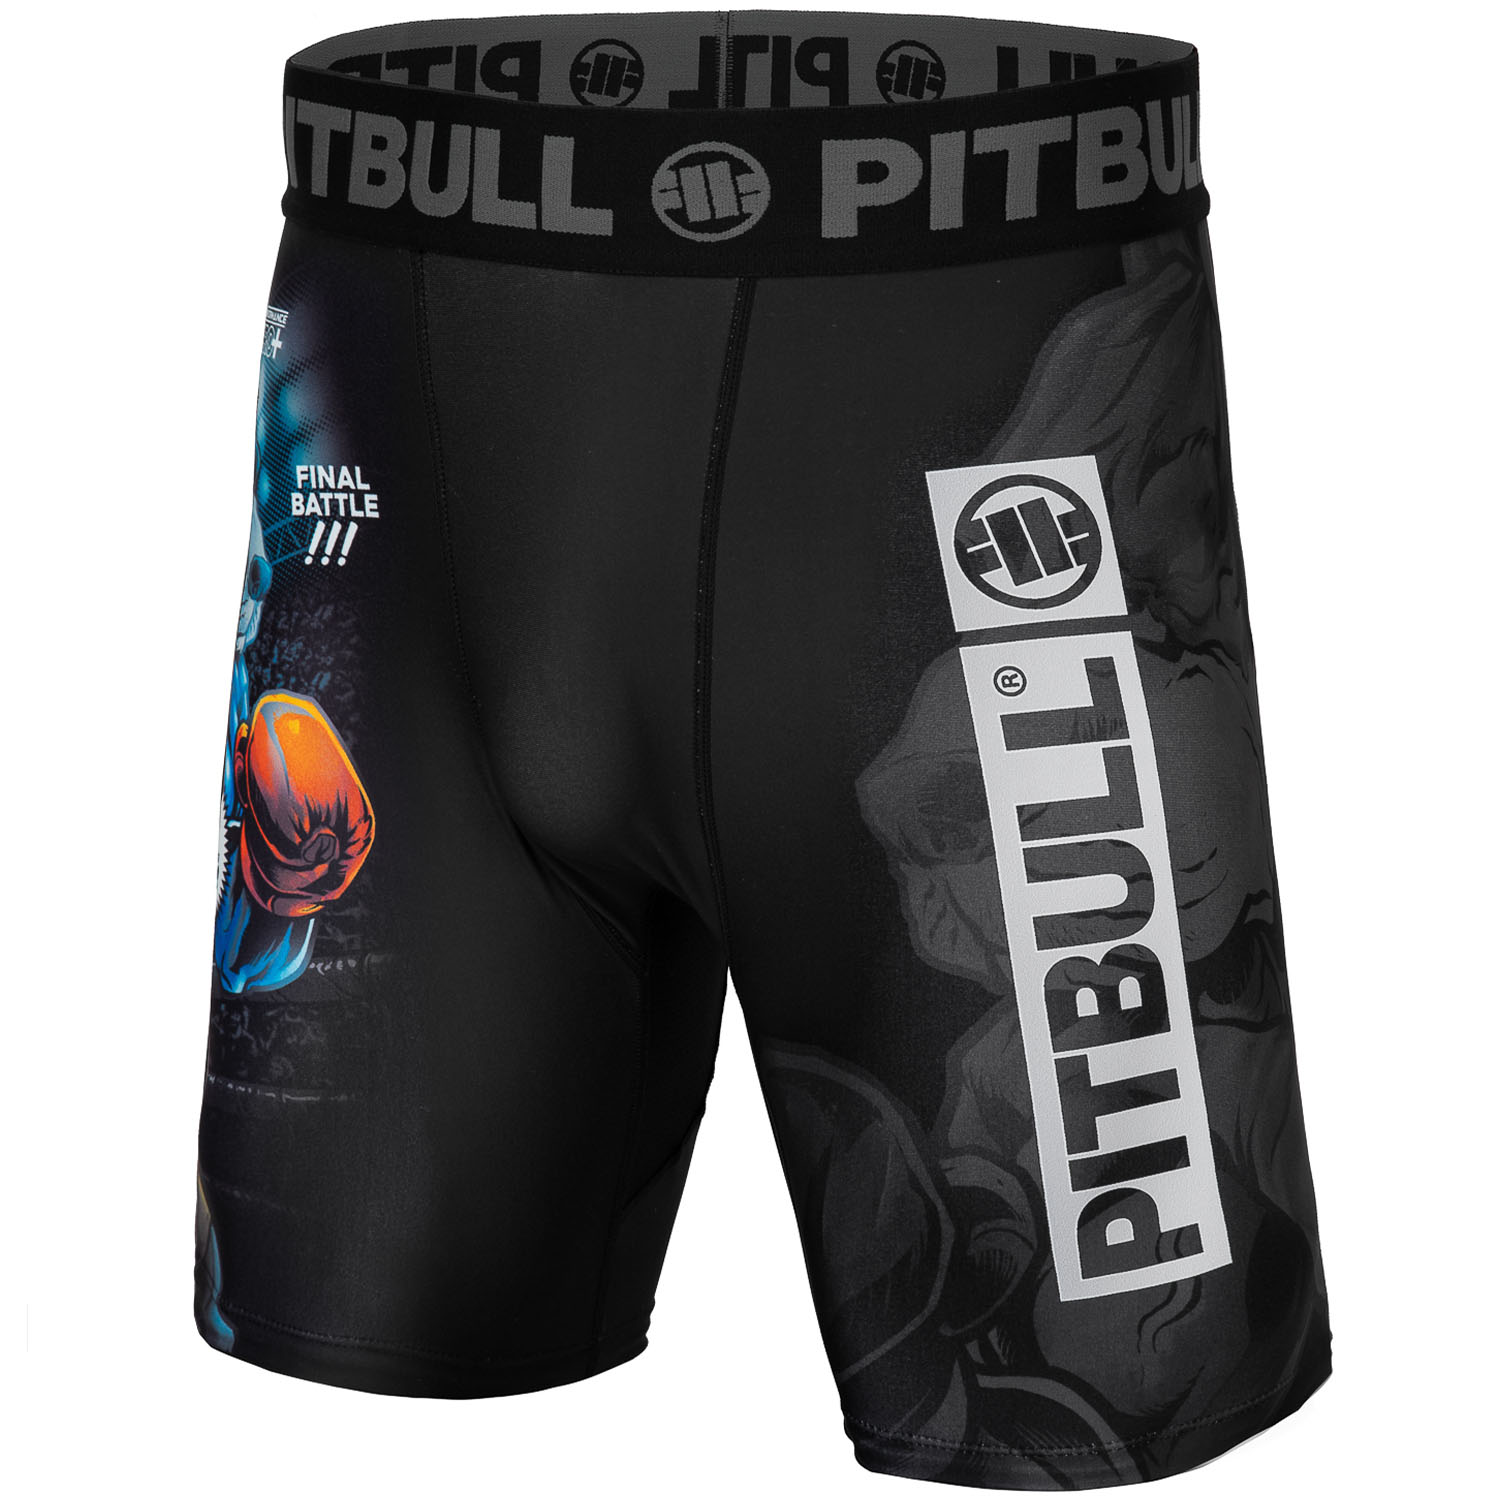 Pit Bull West Coast Compression Shorts, Masters Of Boxing, schwarz